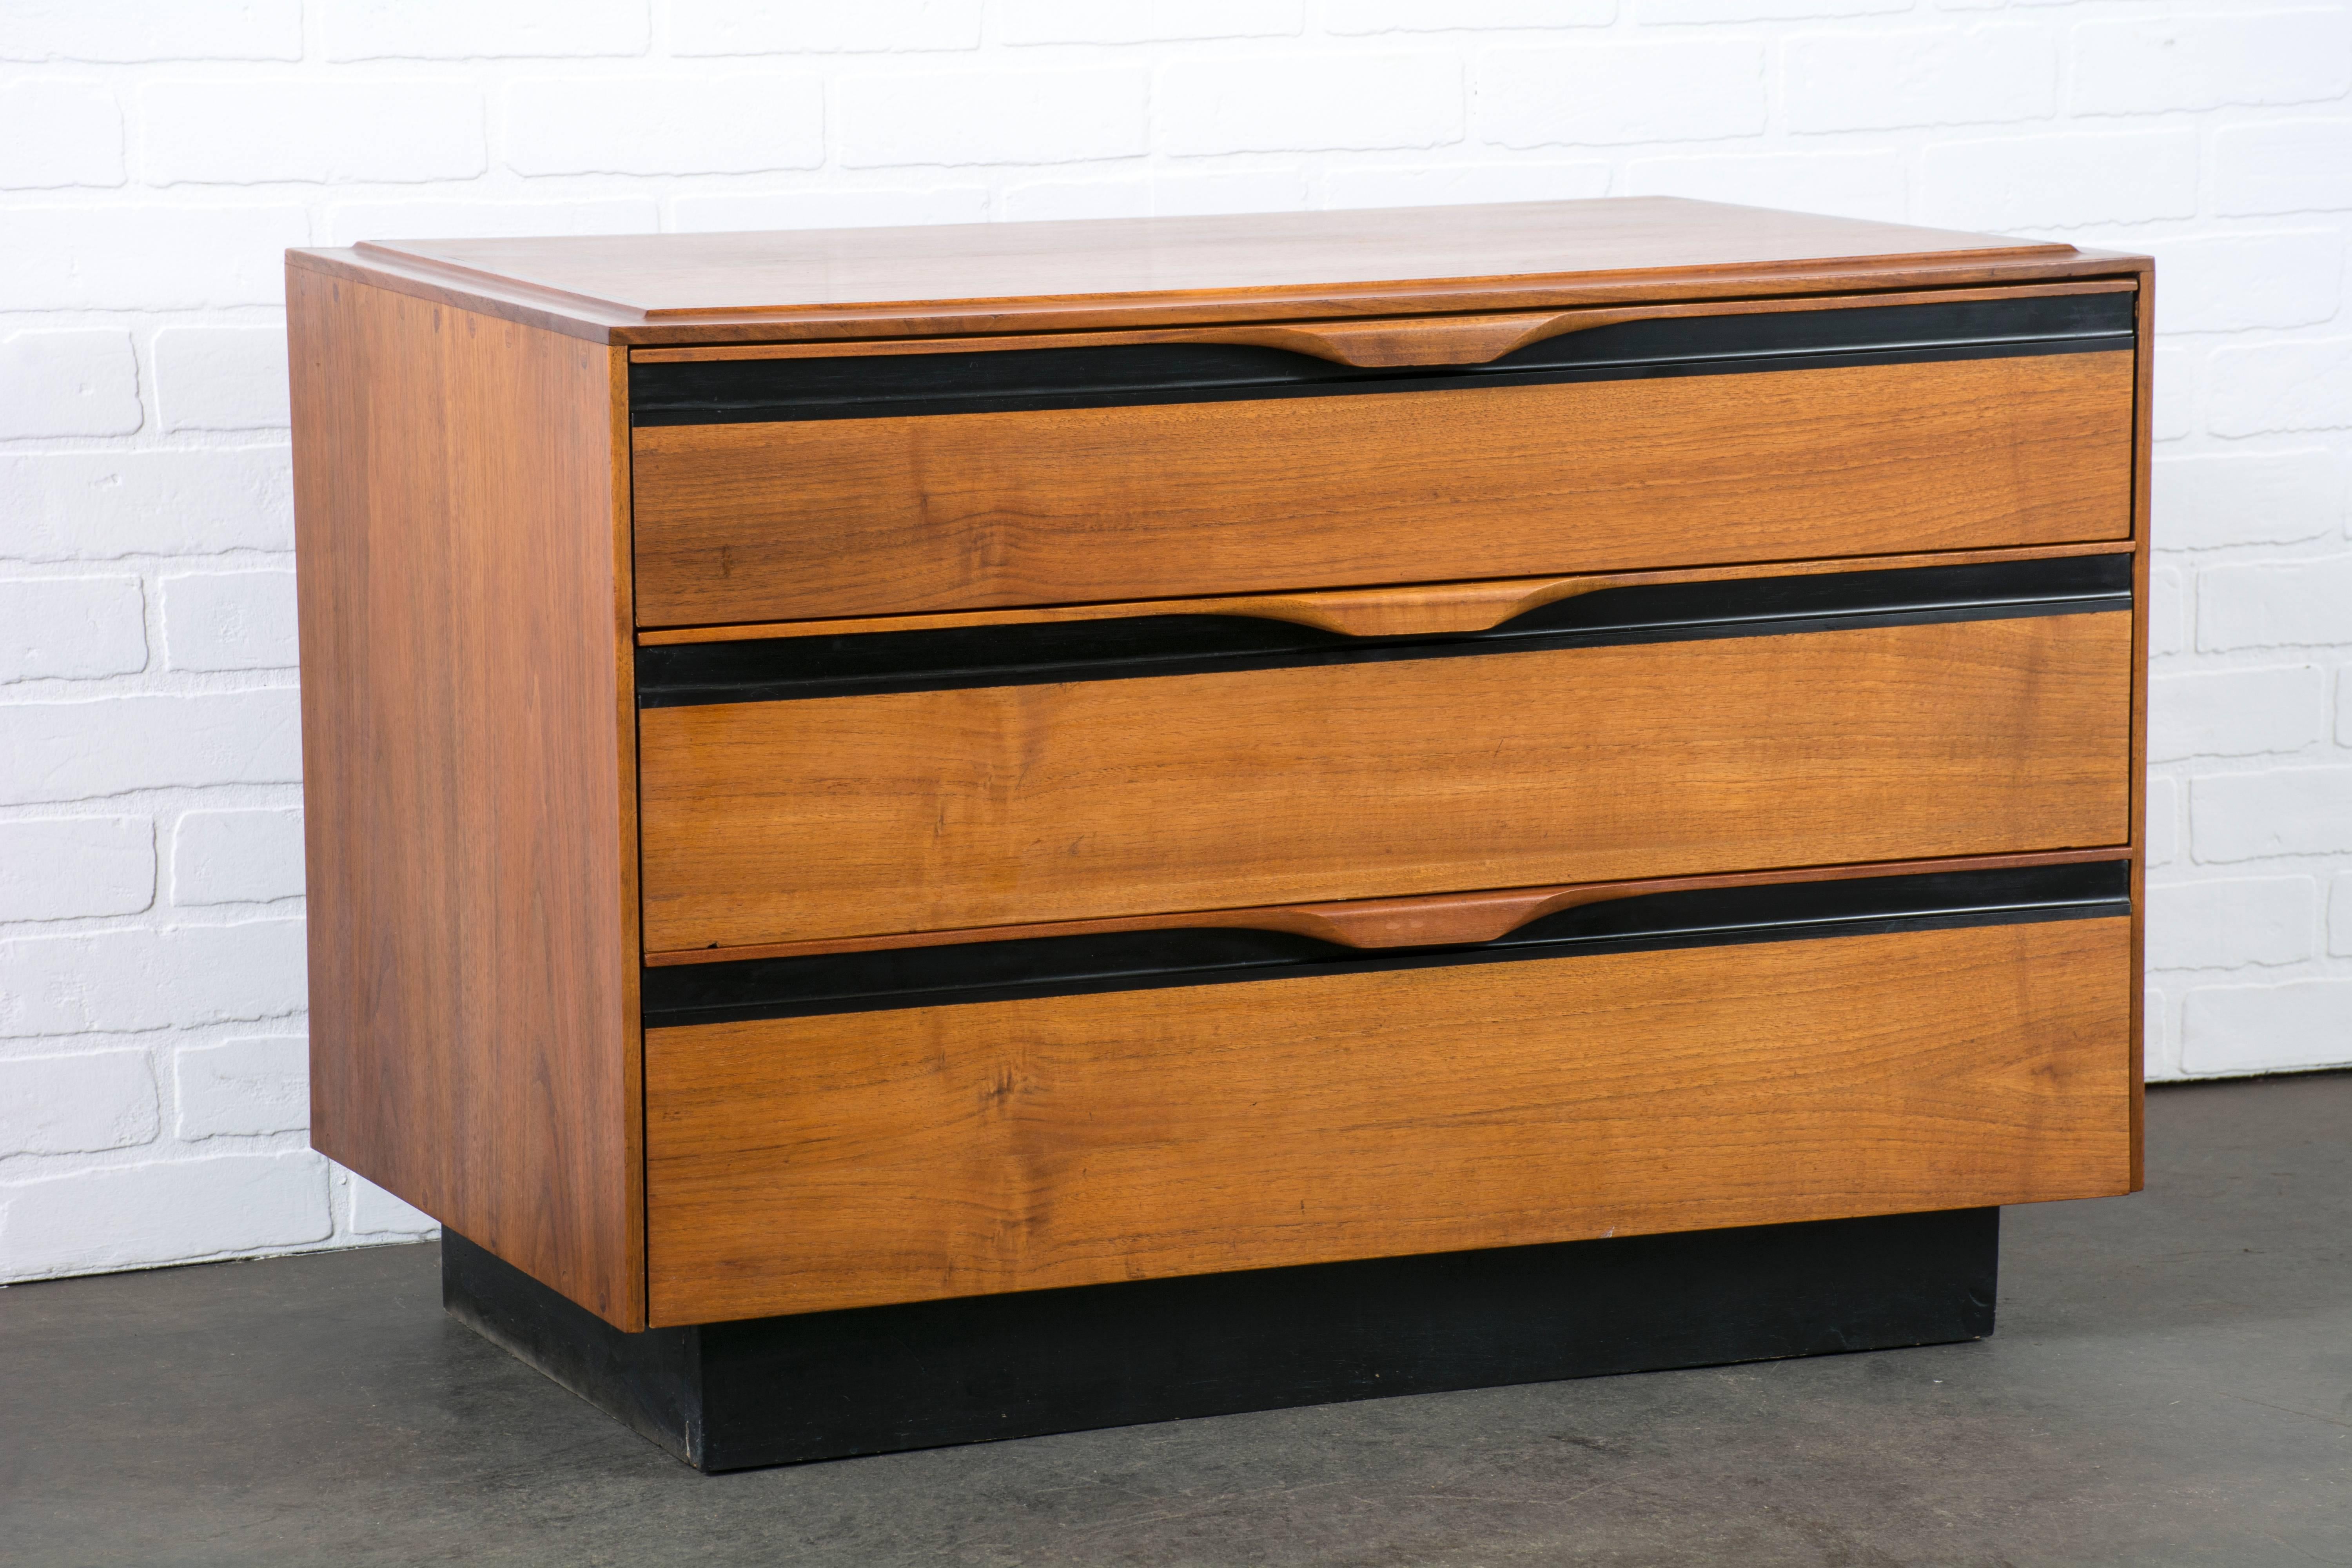 This Mid-Century Modern three-drawer dresser was designed by John Kapel for Glenn of California in the 1960s. It is walnut with black details. Matching gentleman's chest/armoire available separately.